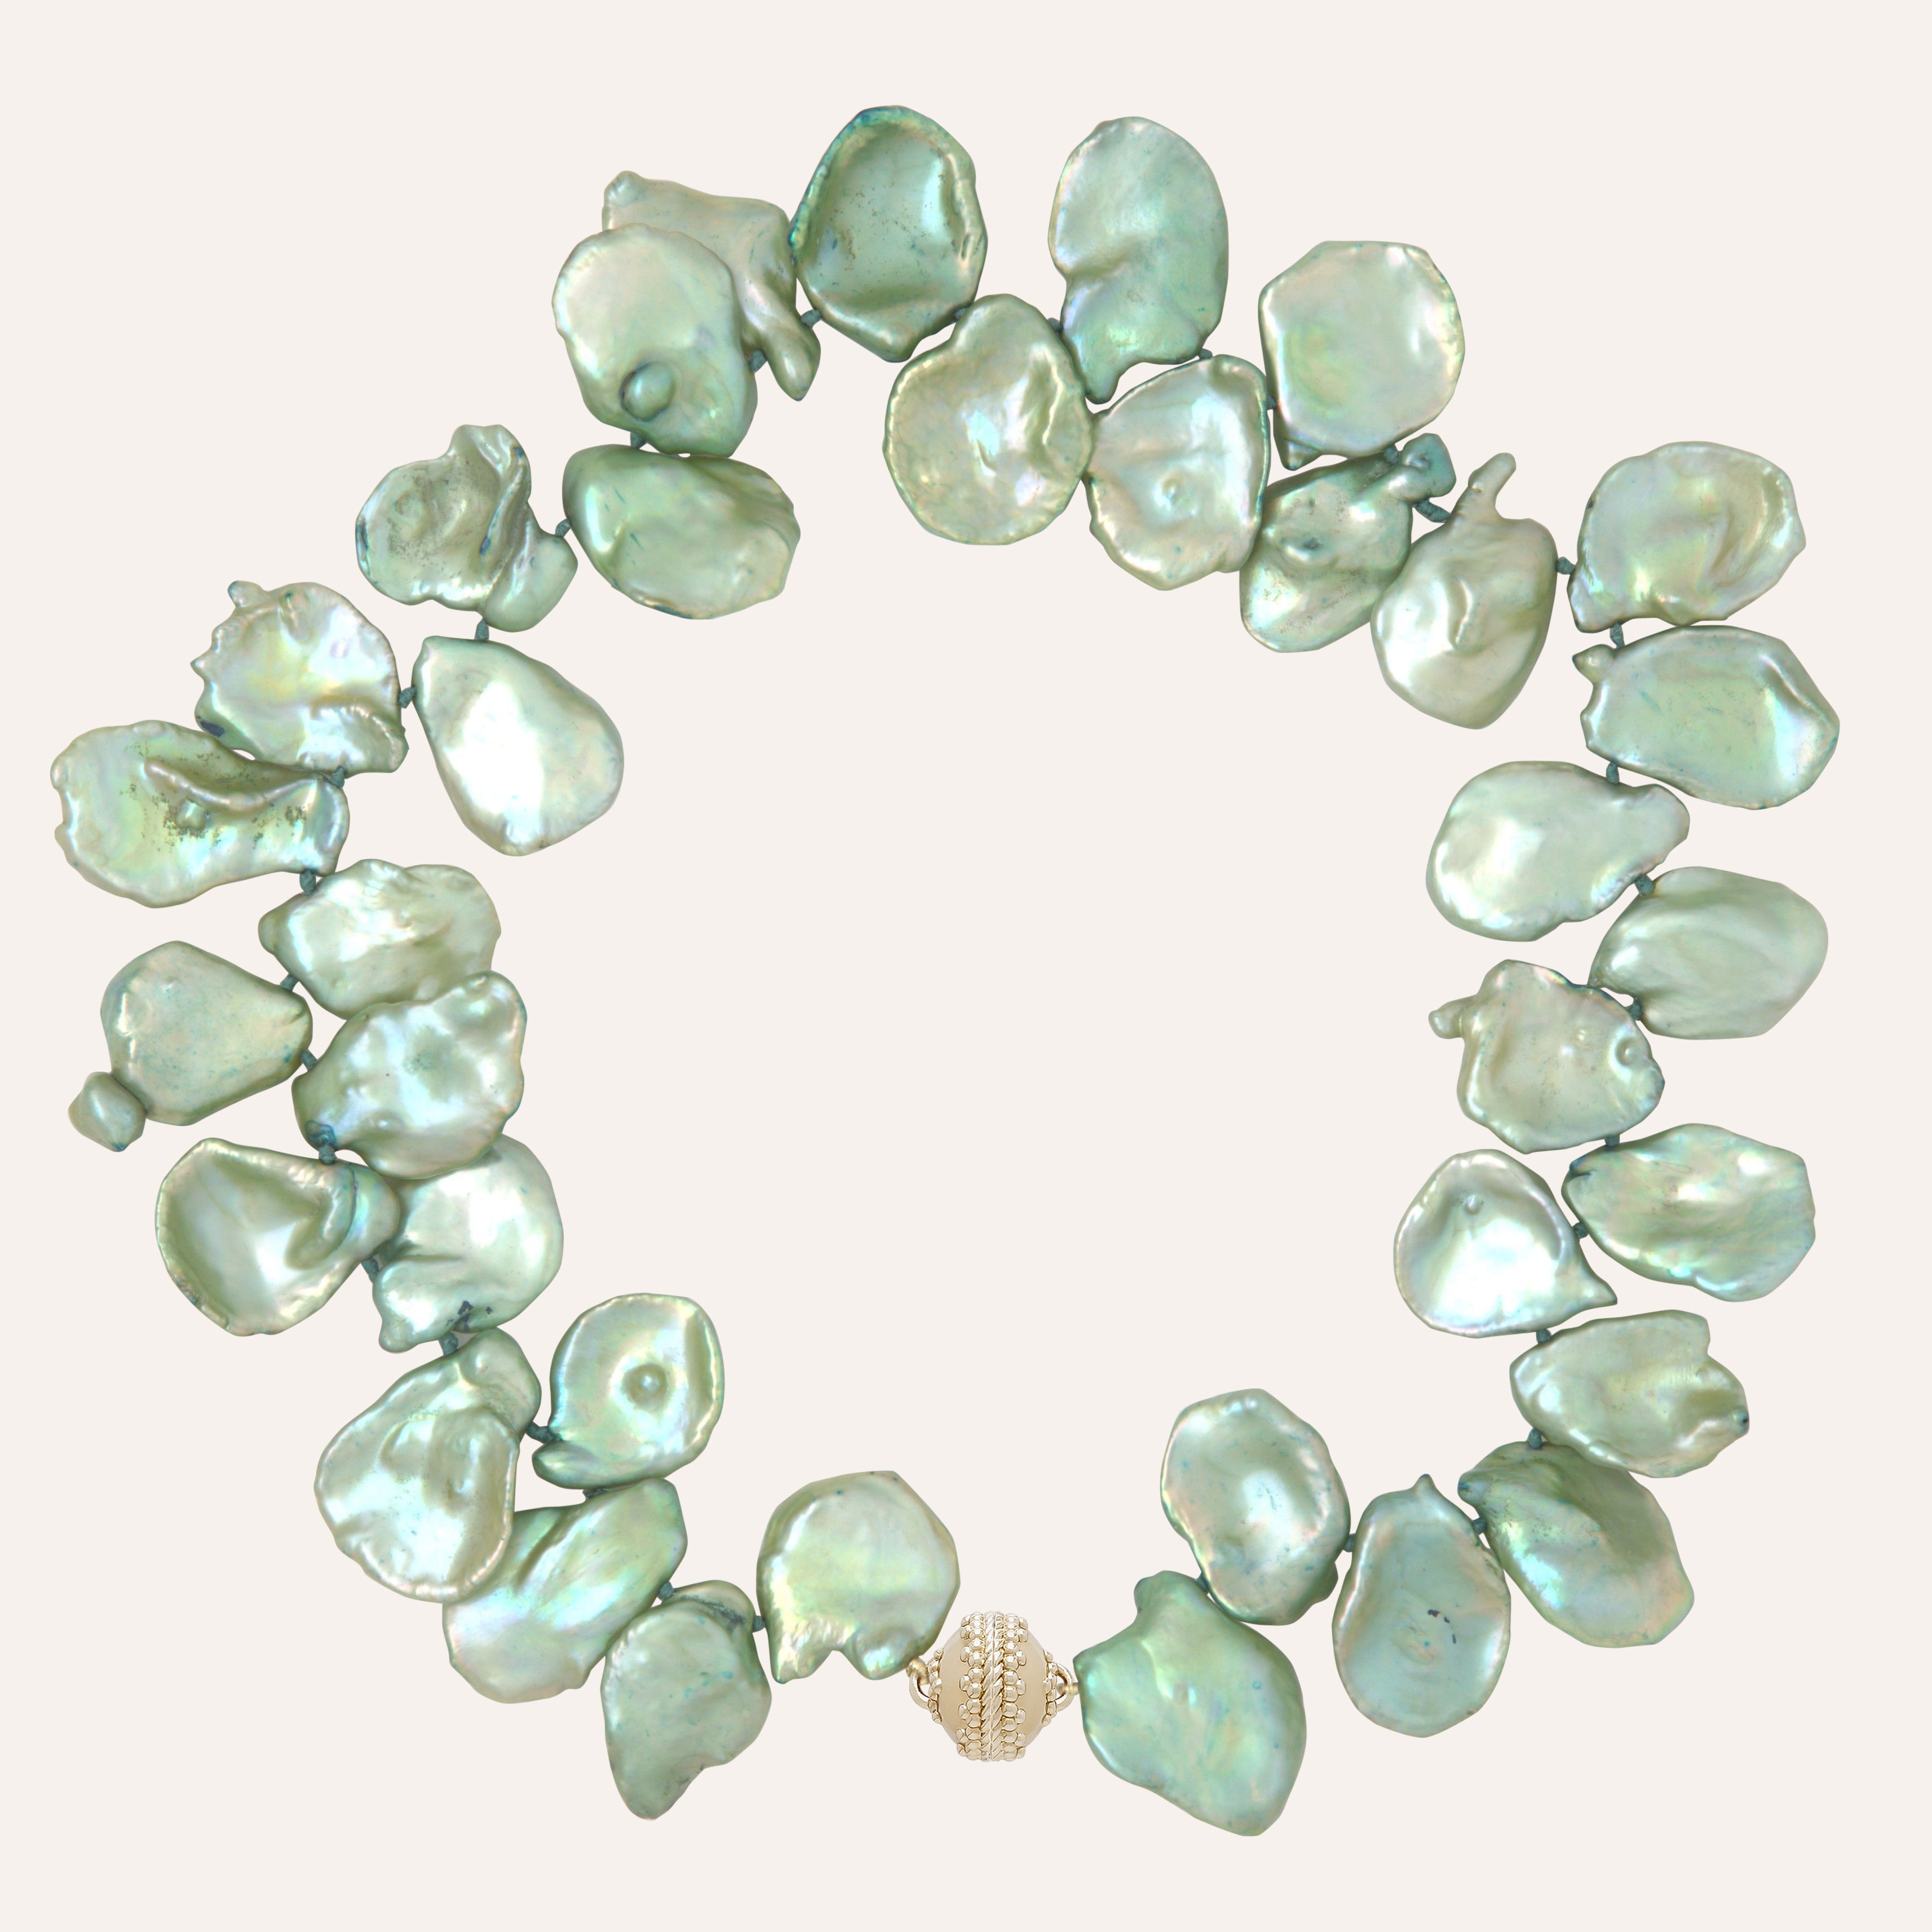 Large Dyed Green Freshwater Keshi Pearl Necklace